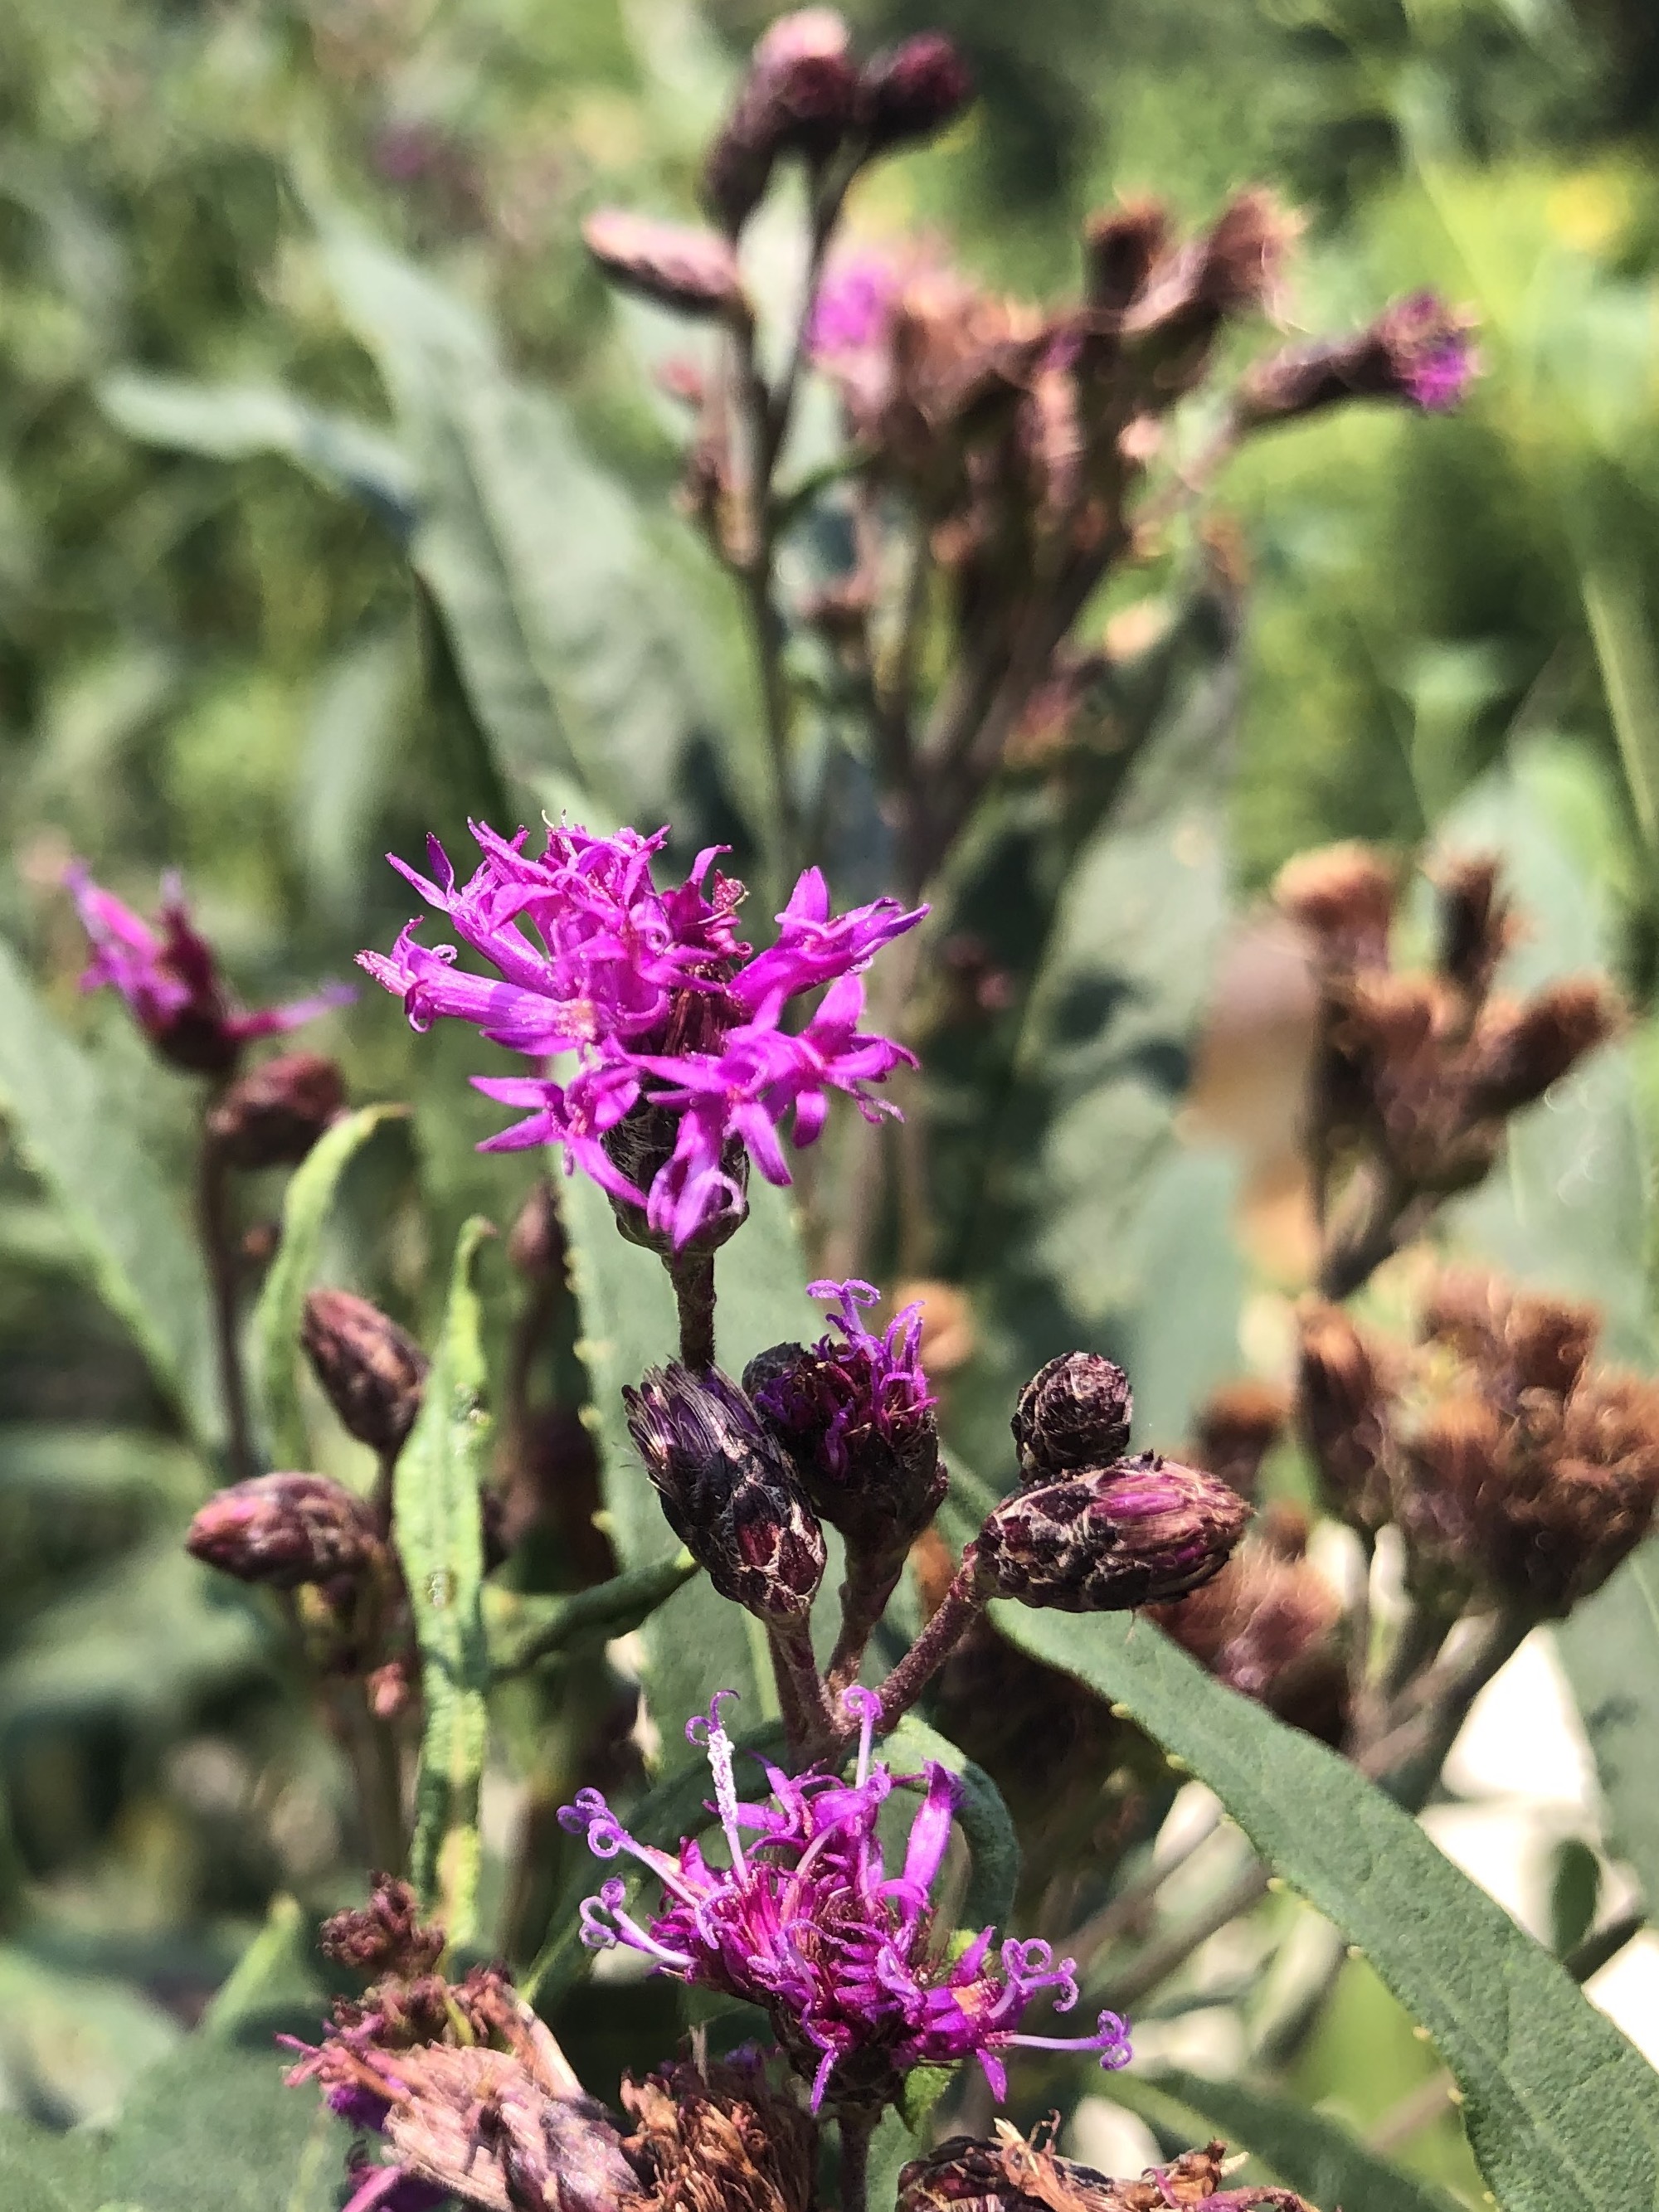 Tall Ironweed along bikepath behind Gregory Street in Madison, Wisconsin on August3, 2021.